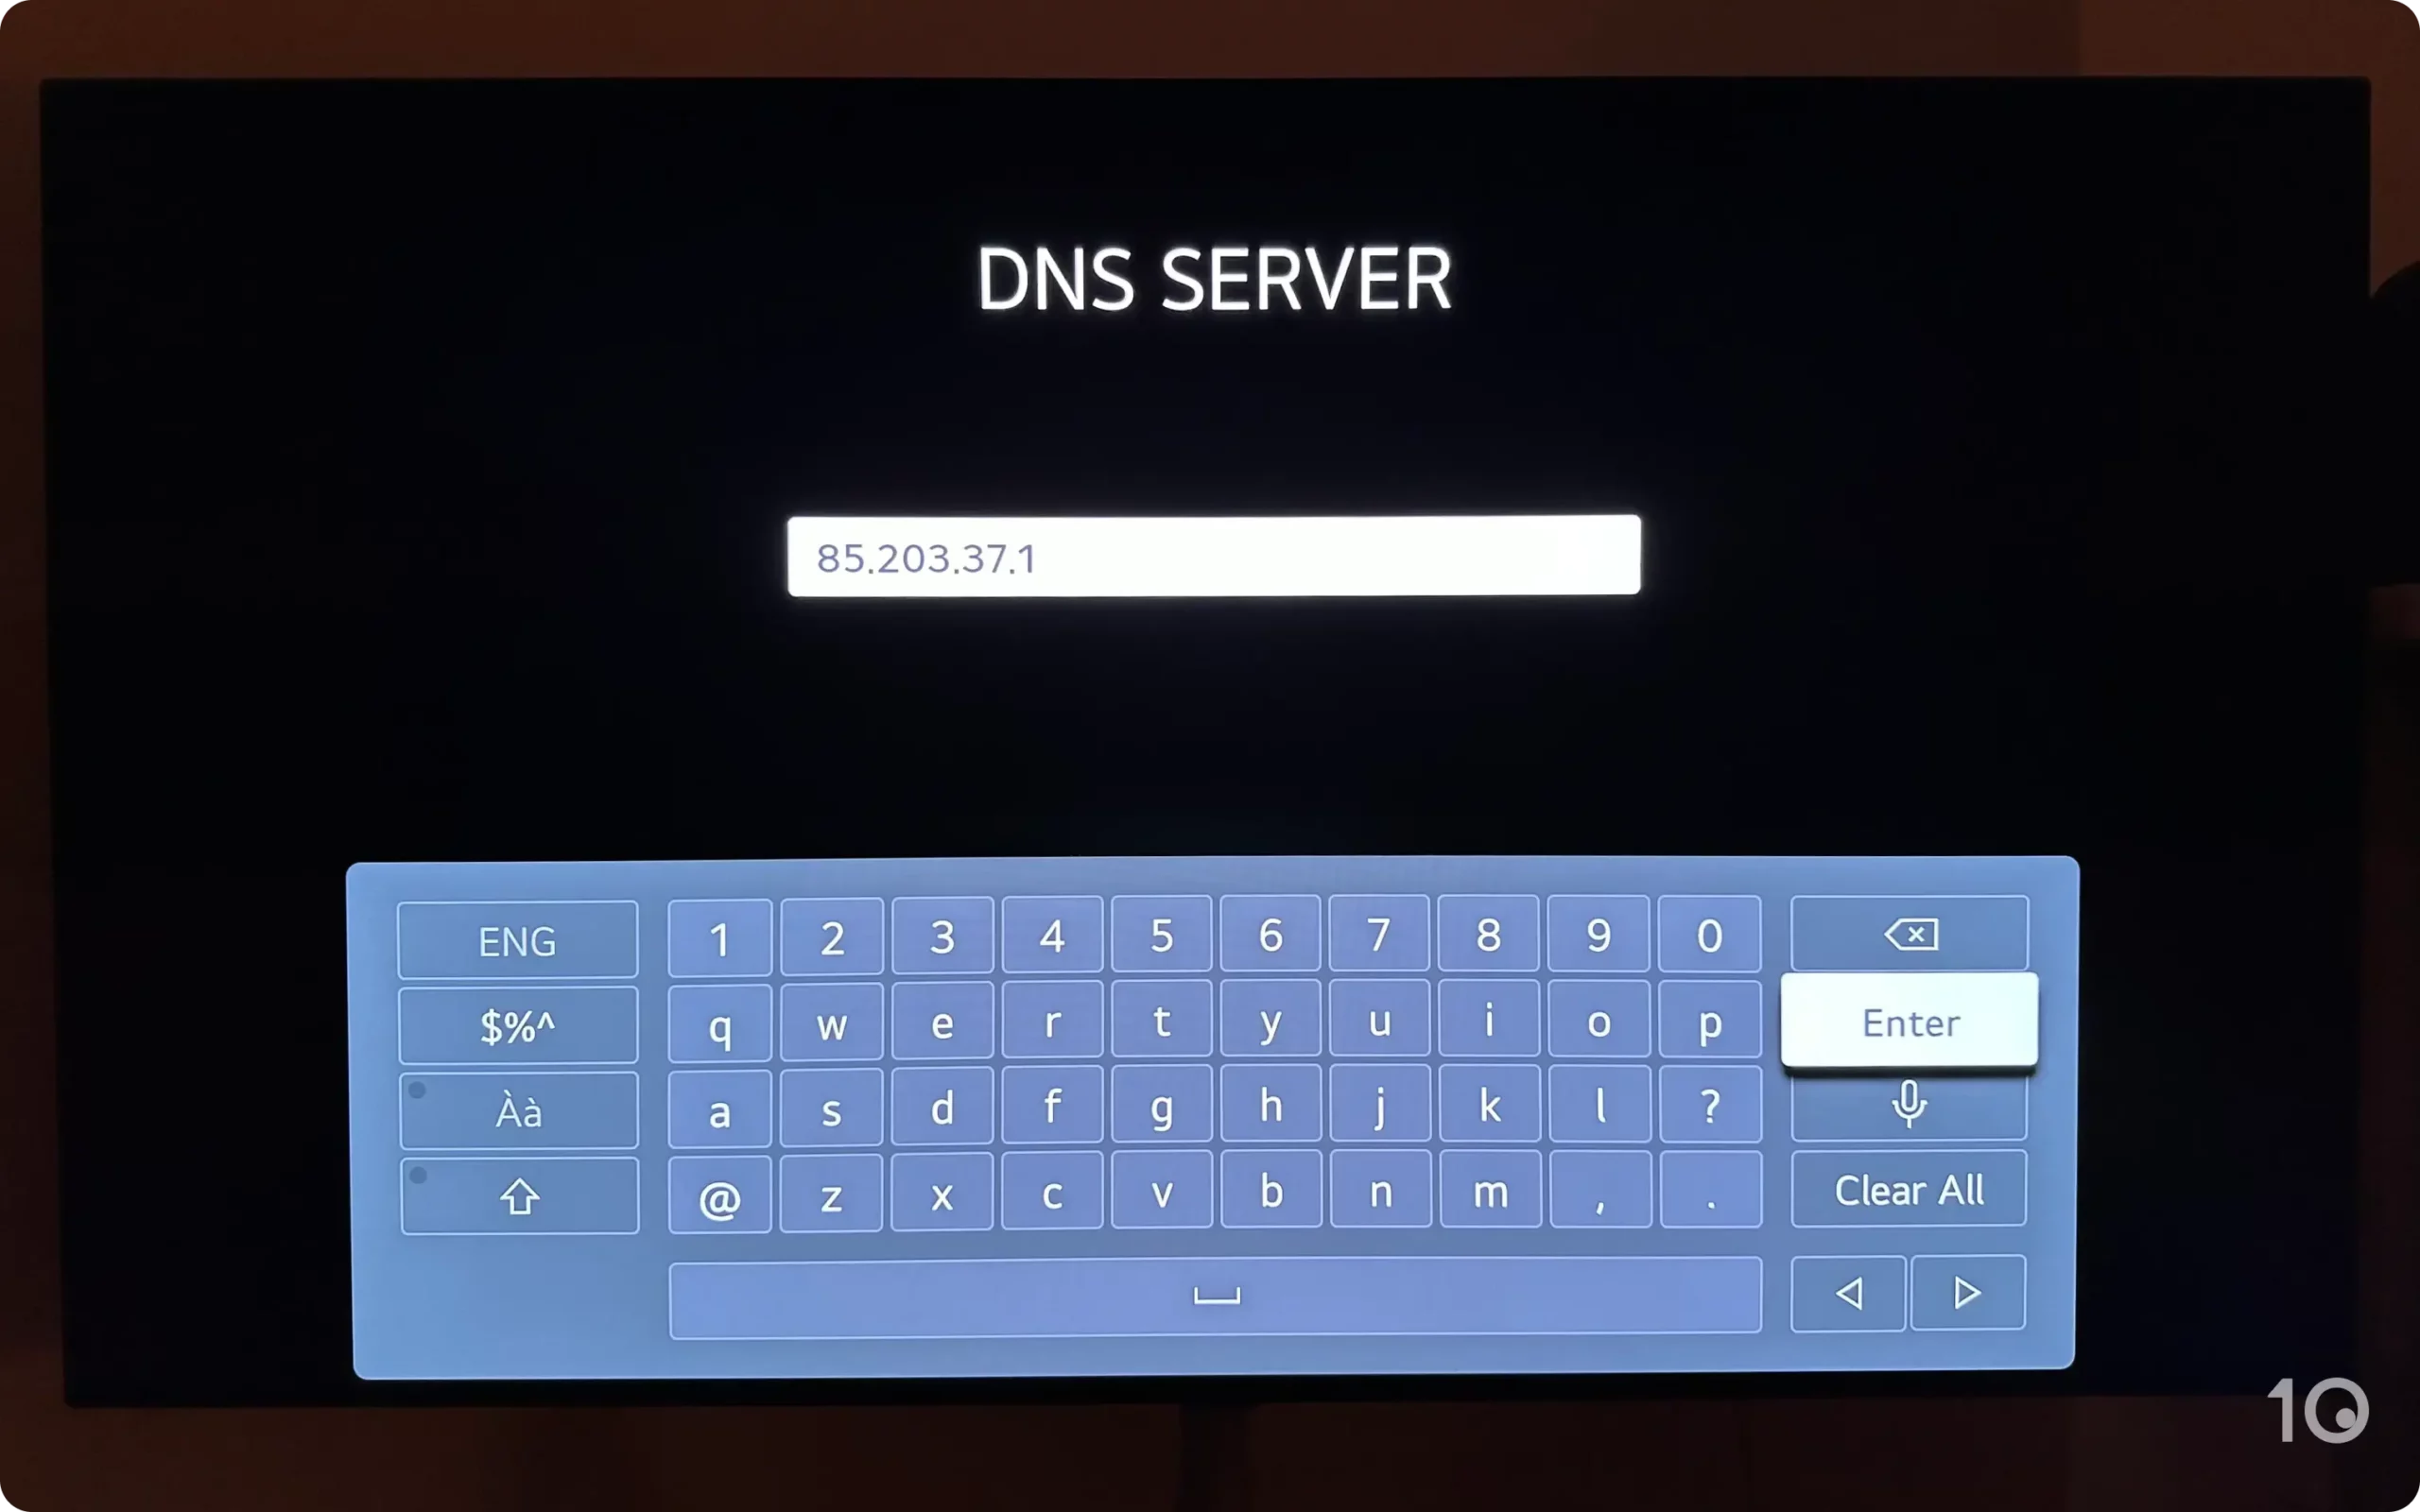 LG TV screen with a DNS Server input box displaying the address '85.203.37.1'.